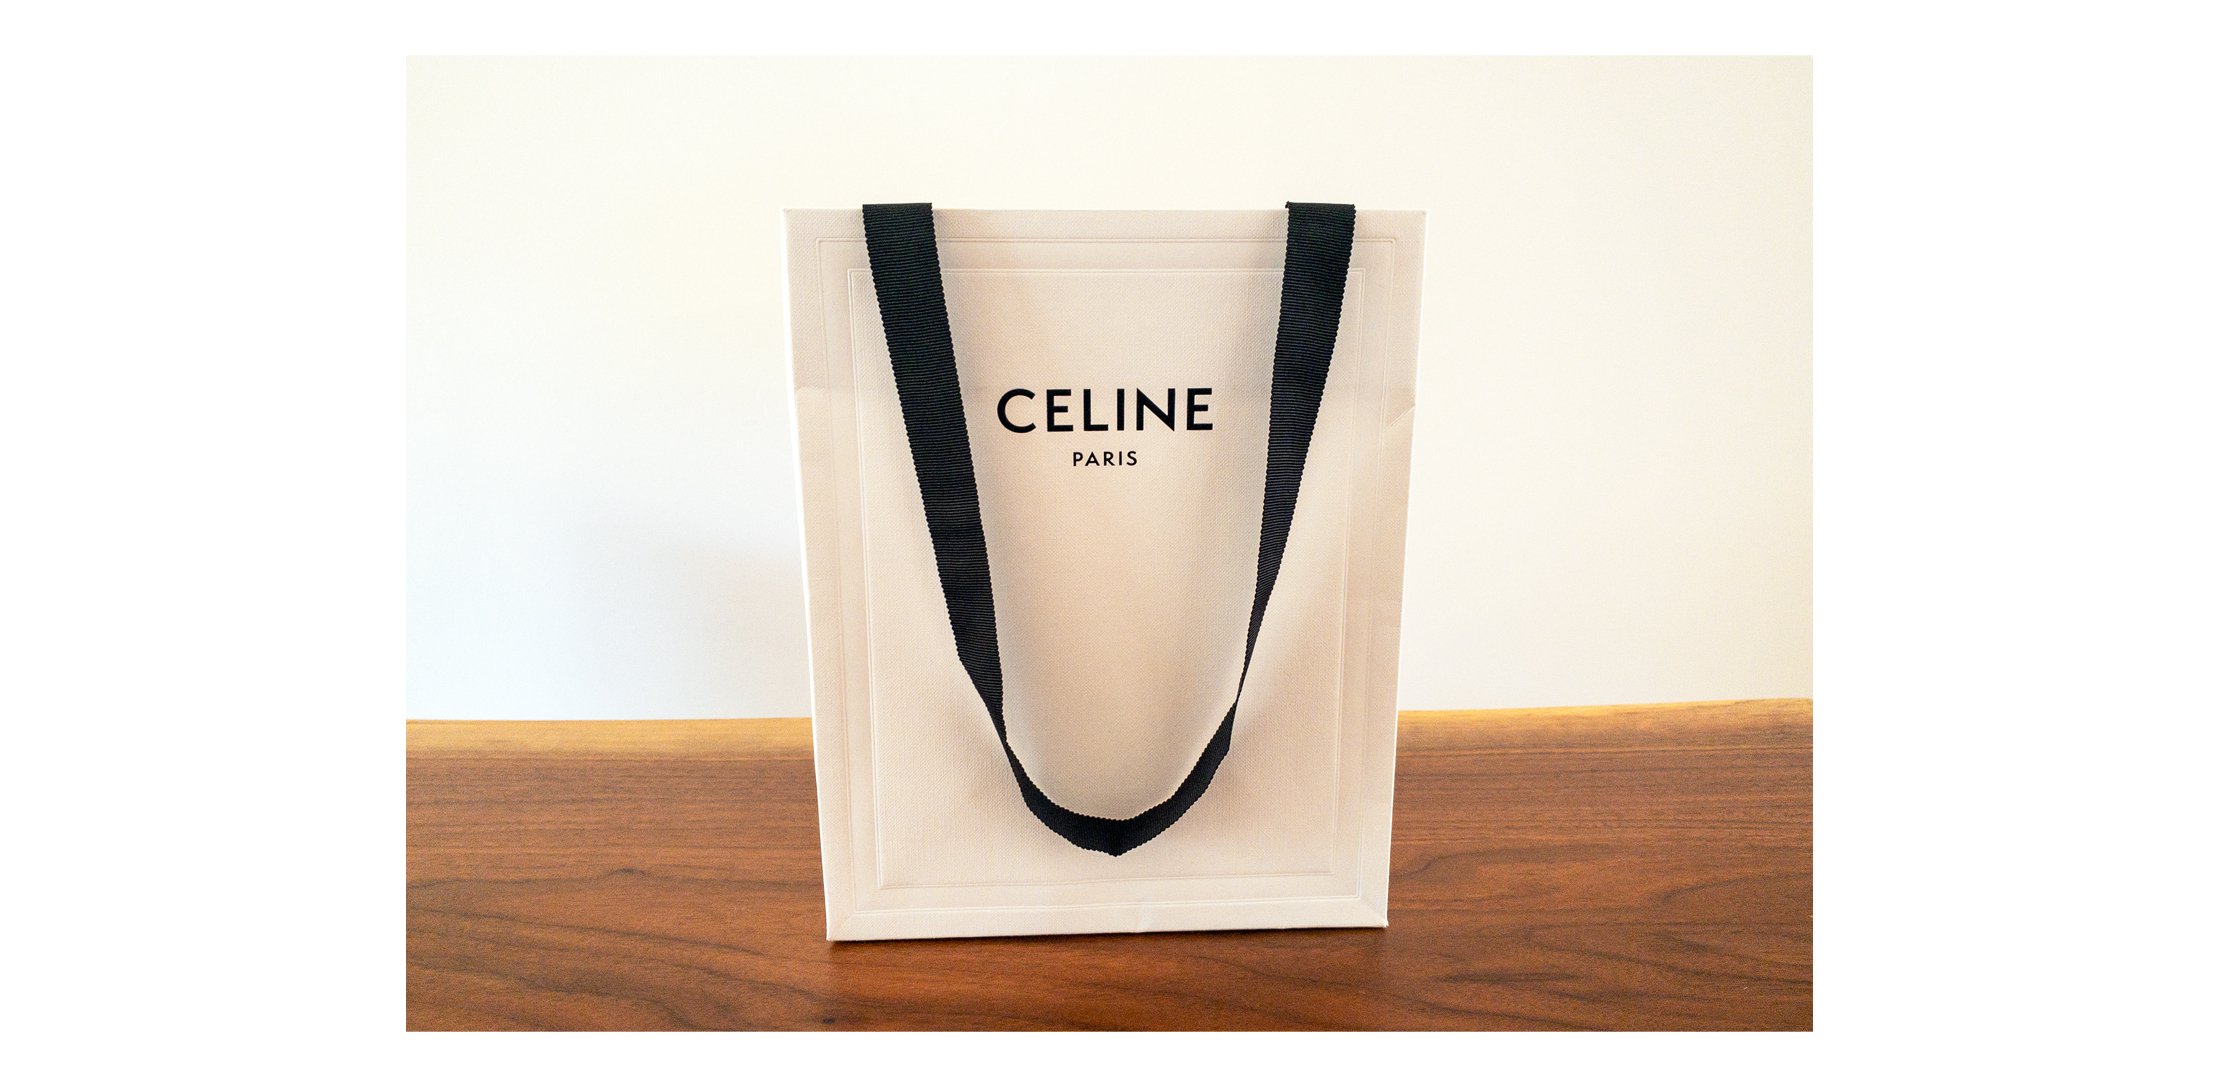 Celine Trio Bag Review - Sizing, Wear & Tear and Styling - whatveewore